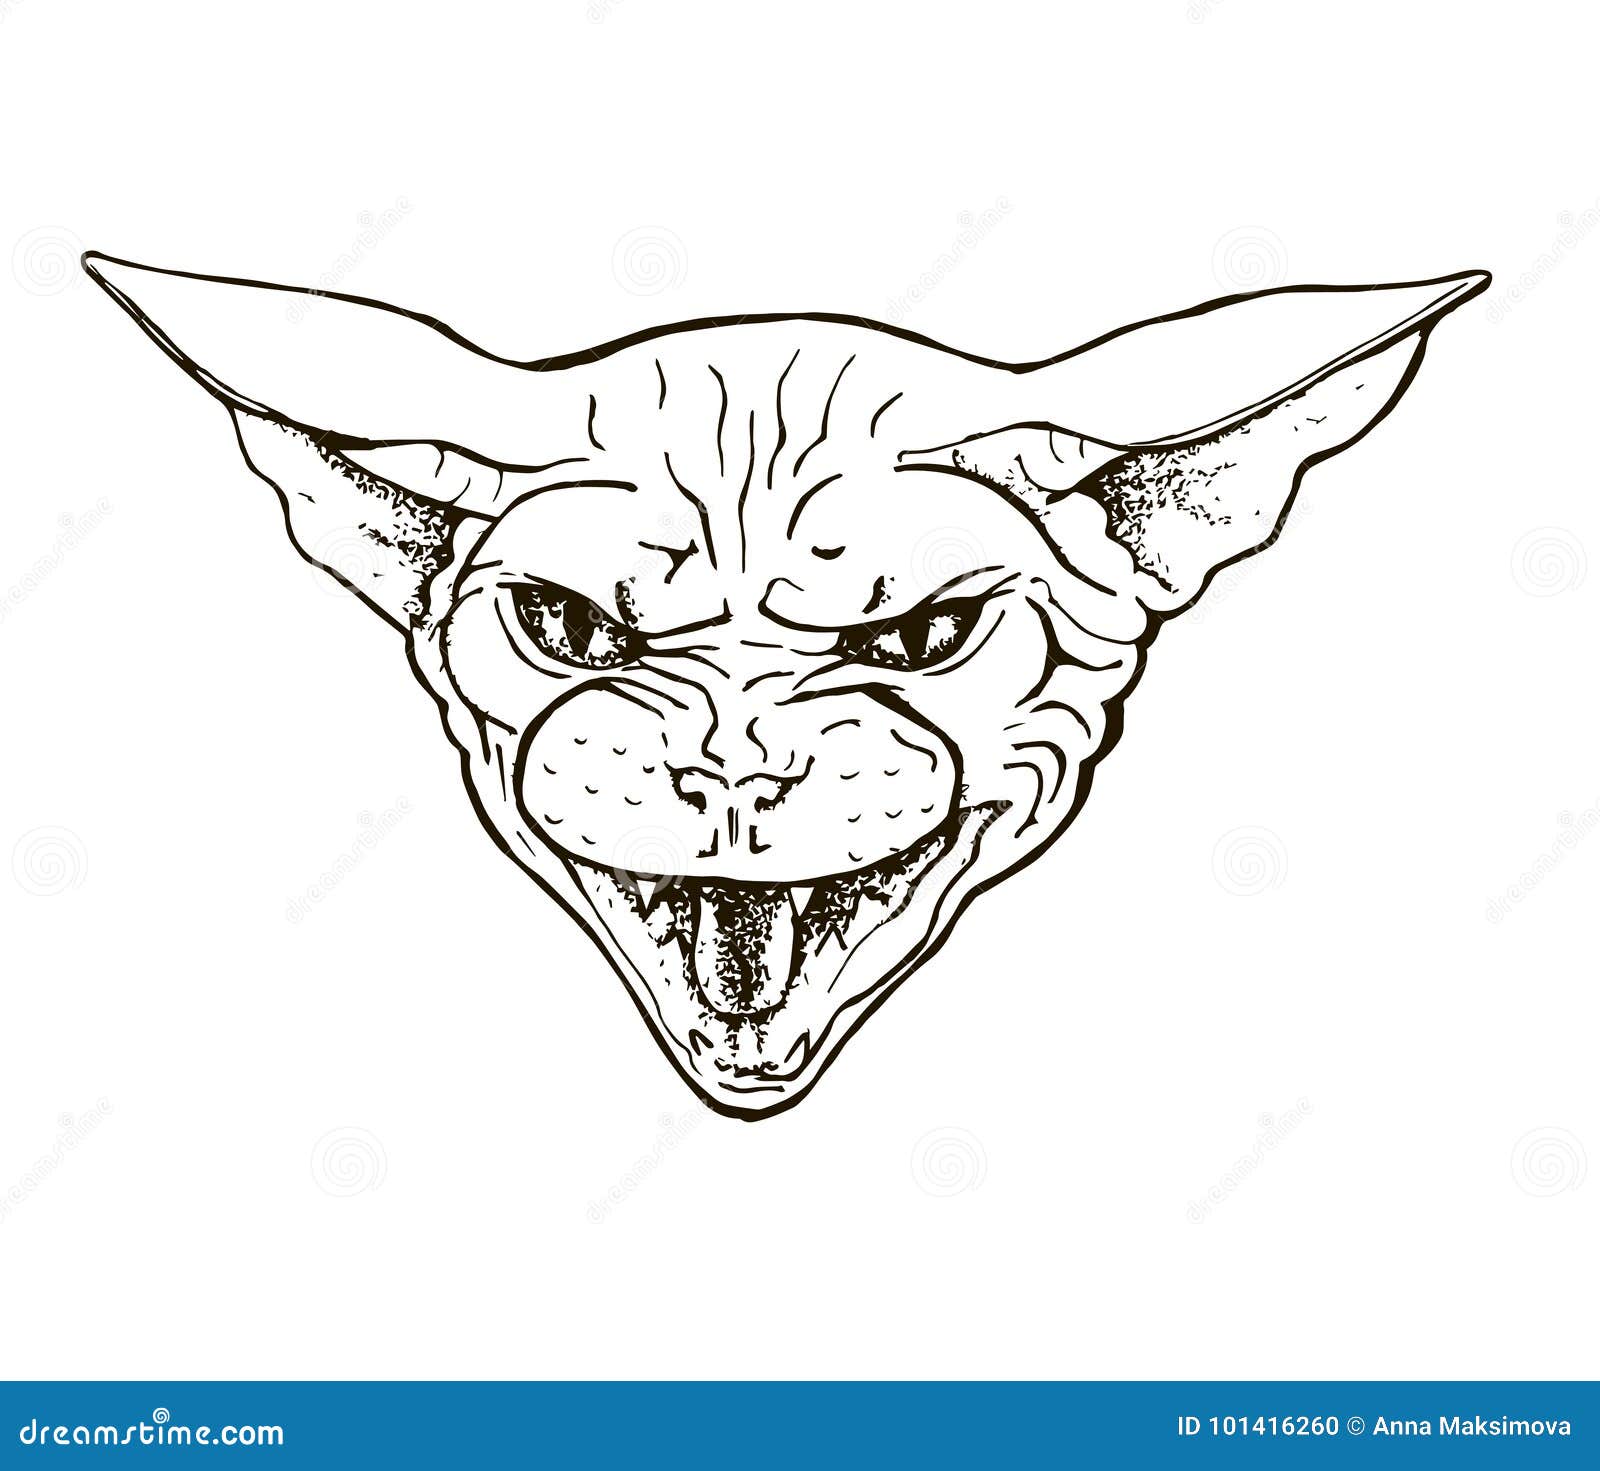 13,400+ Angry Cat Stock Illustrations, Royalty-Free Vector